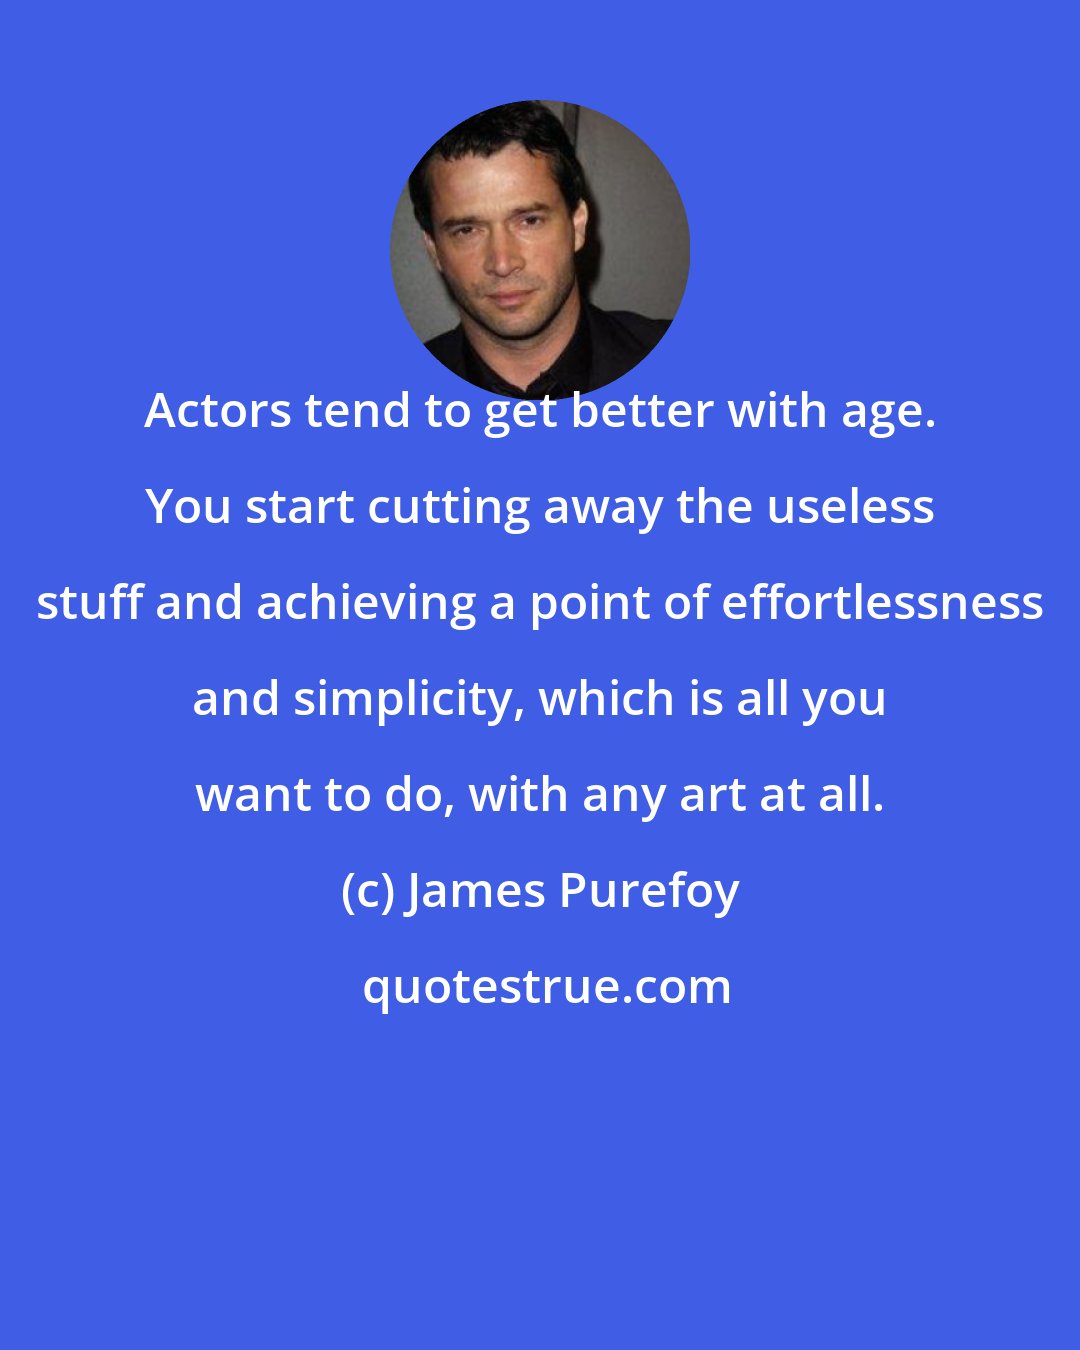 James Purefoy: Actors tend to get better with age. You start cutting away the useless stuff and achieving a point of effortlessness and simplicity, which is all you want to do, with any art at all.